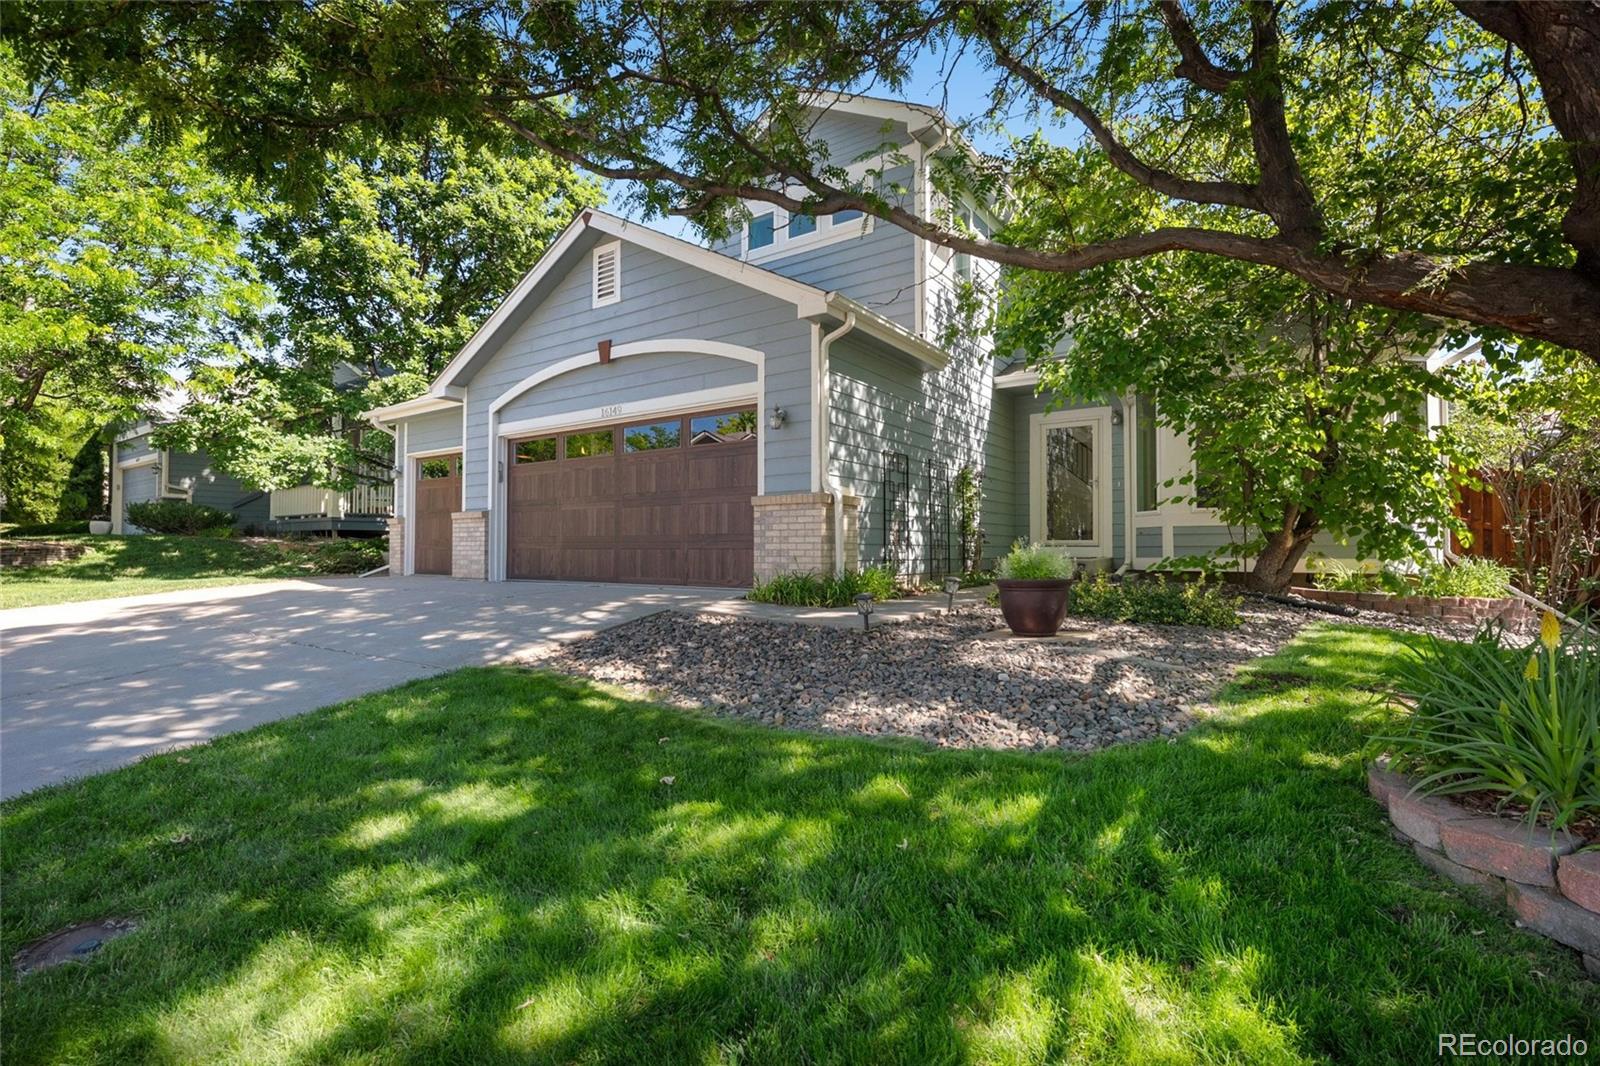 Report Image for 16149 W 70th Place,Arvada, Colorado